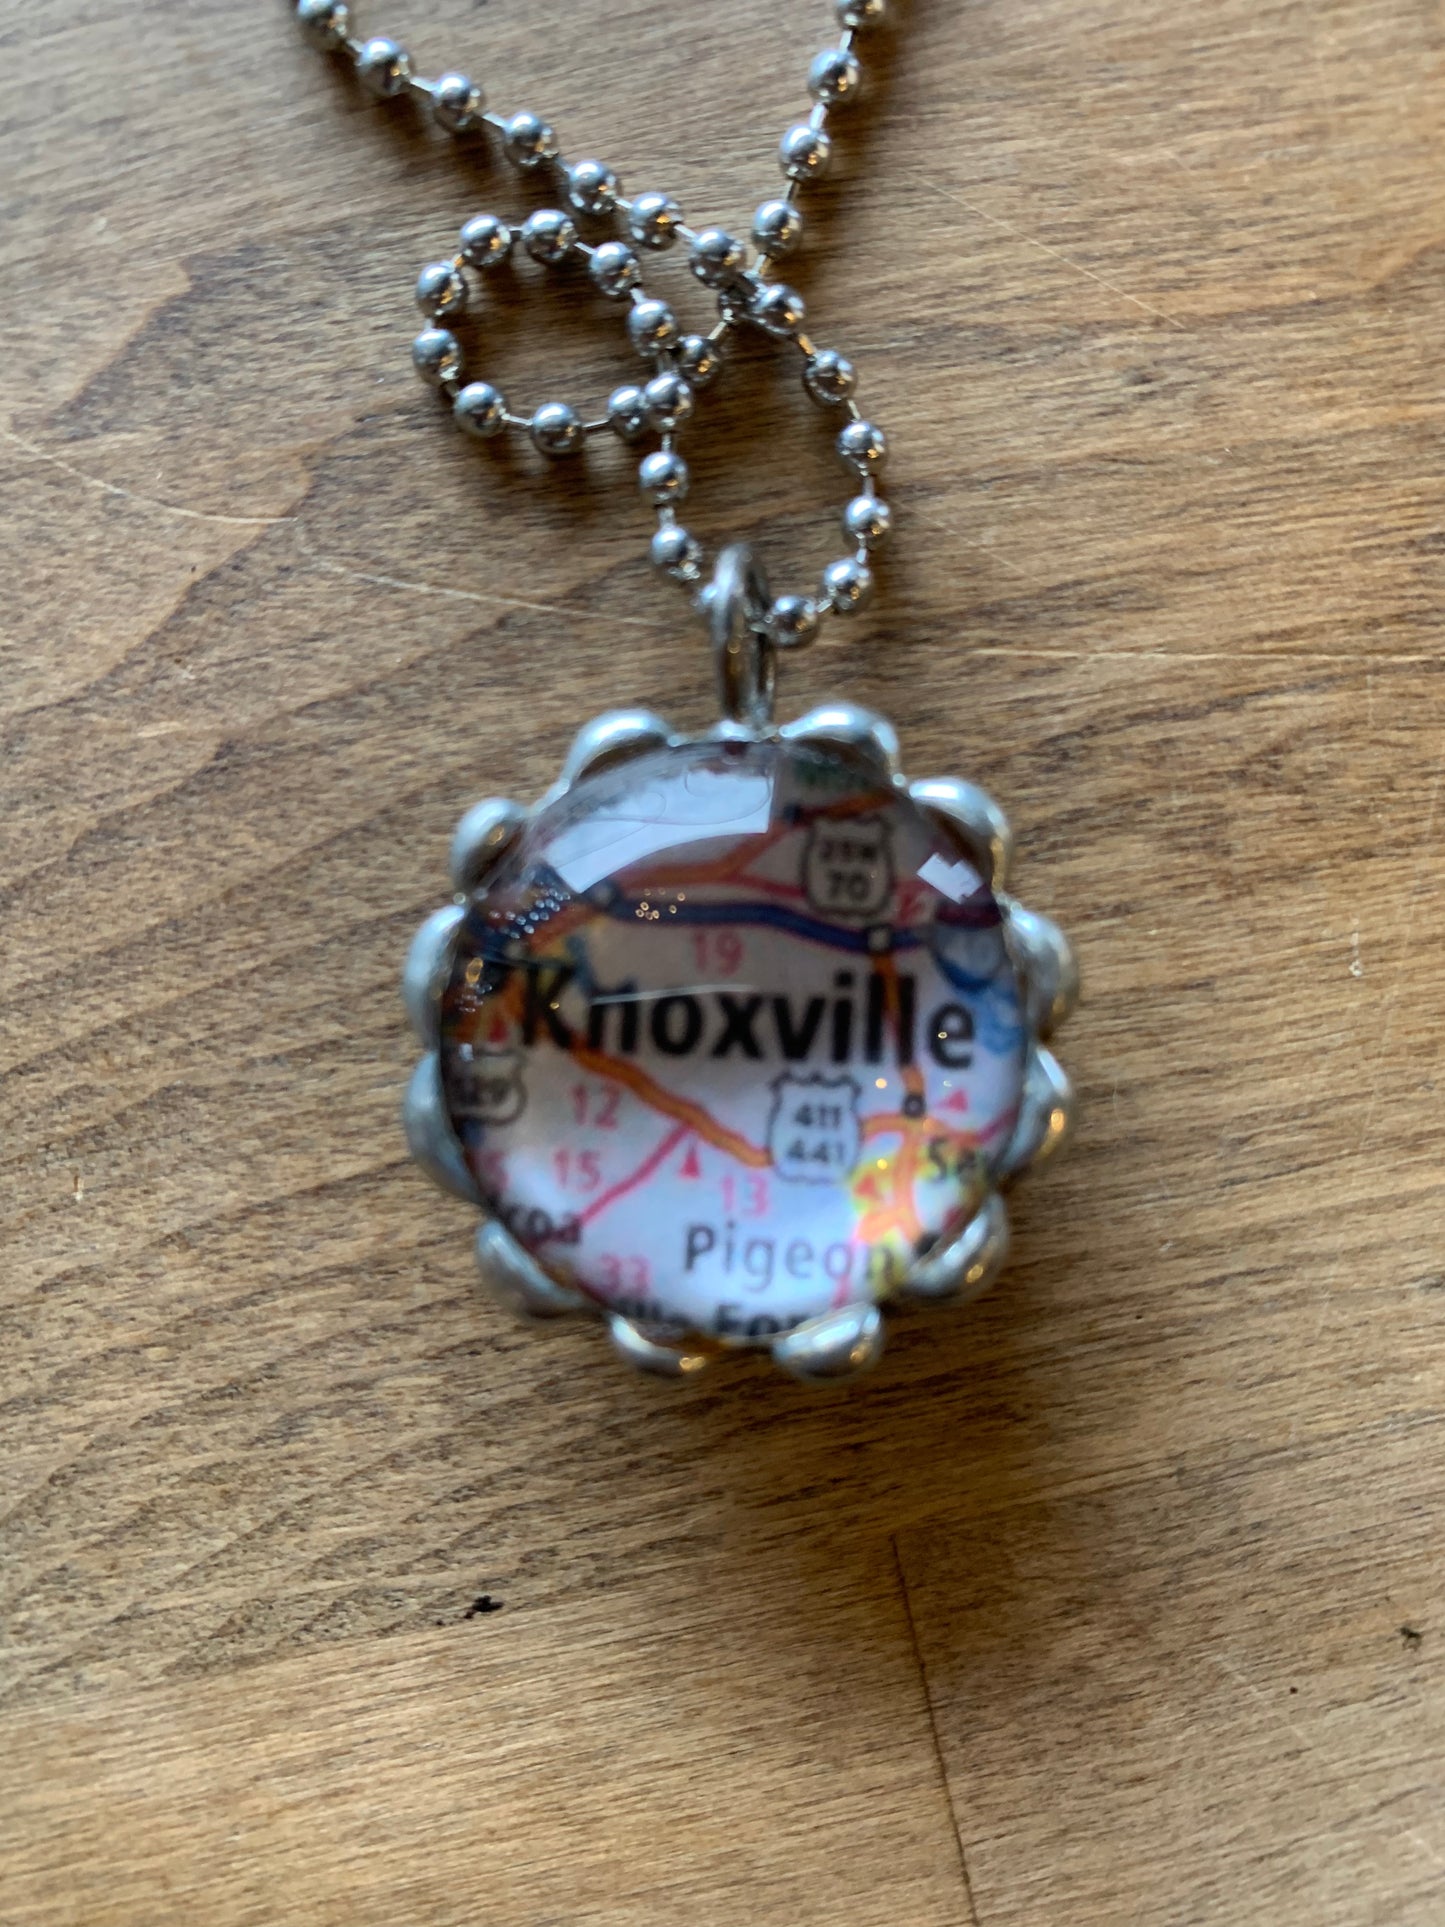 * Knoxville Map Ball and Chain Necklace